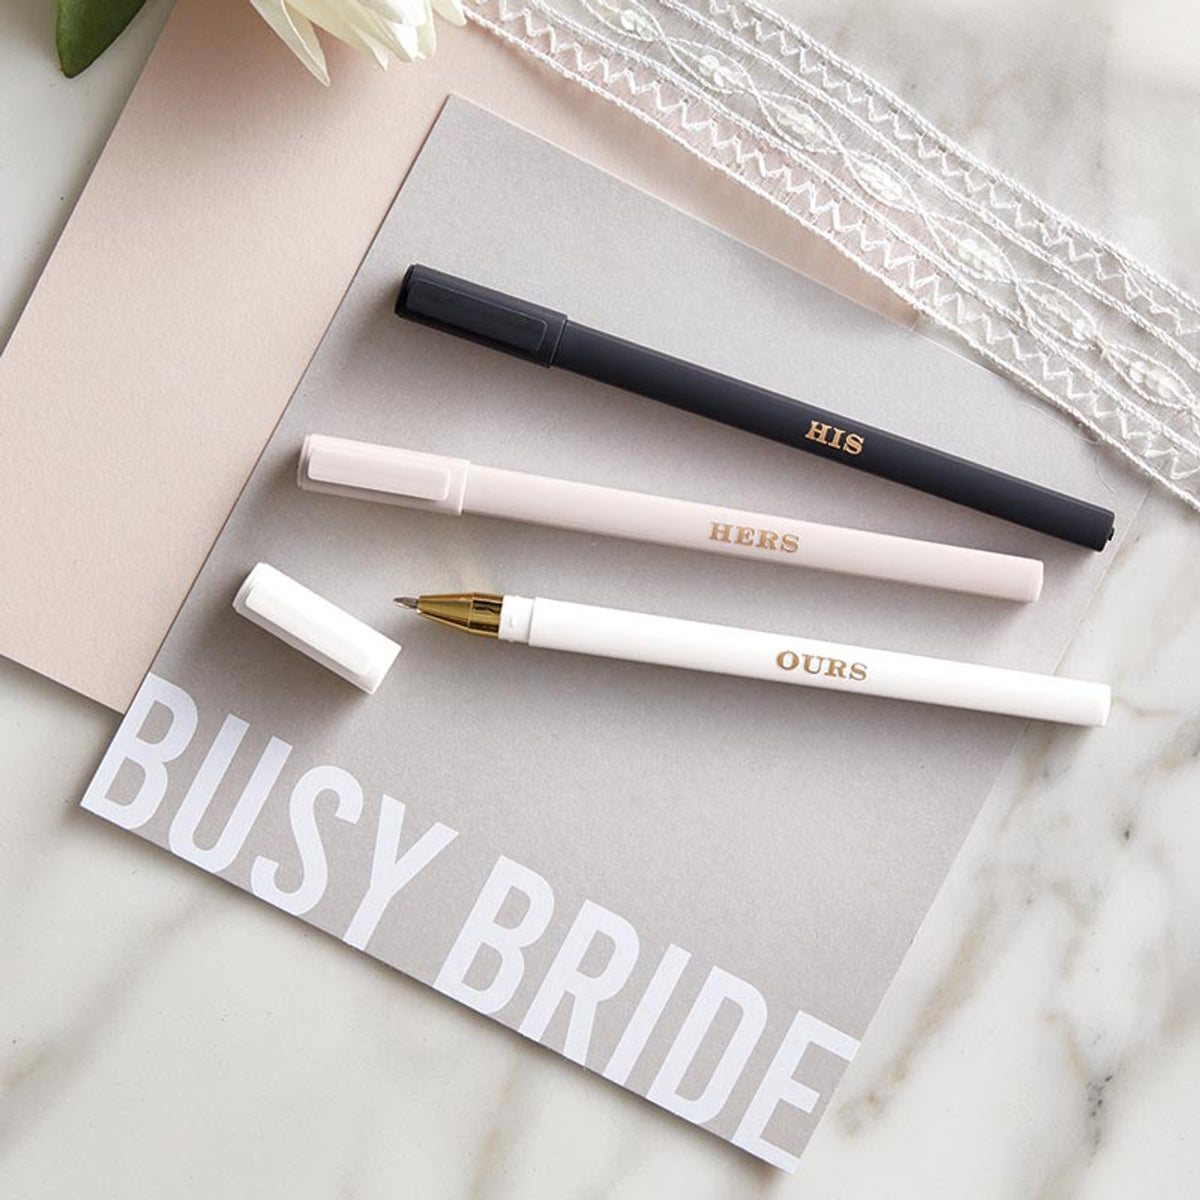 His Hers Ours Wedding Pen Set